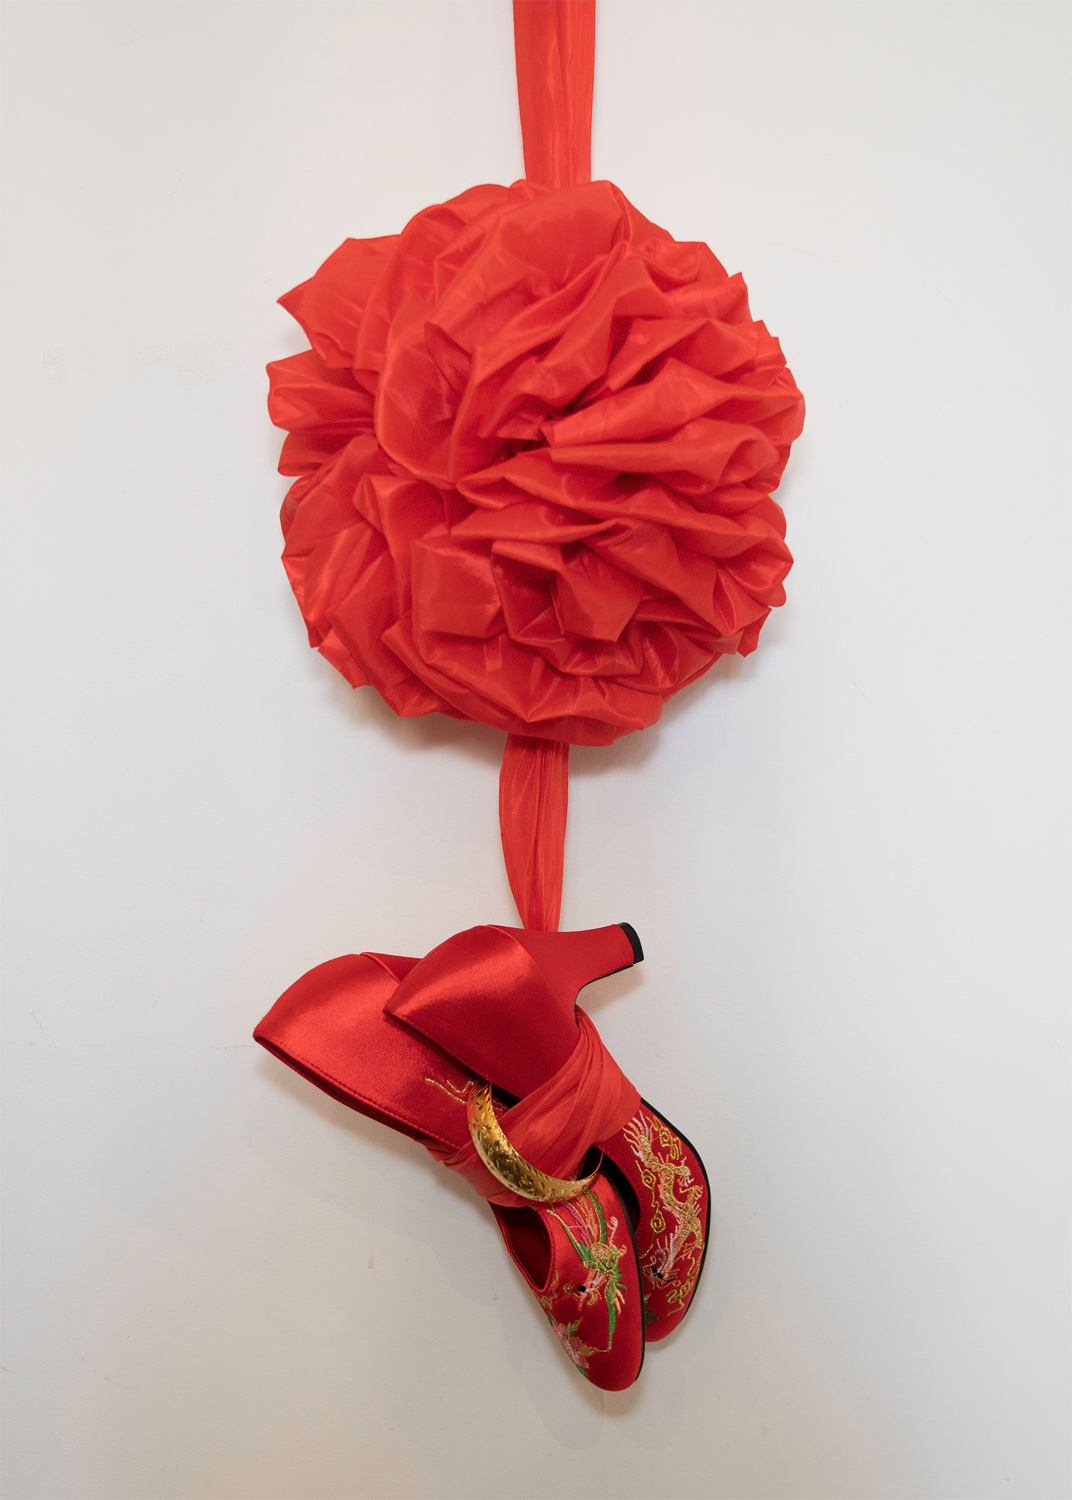 Red ribbon hydrangea, Chinese culture, marriage, staged photography.